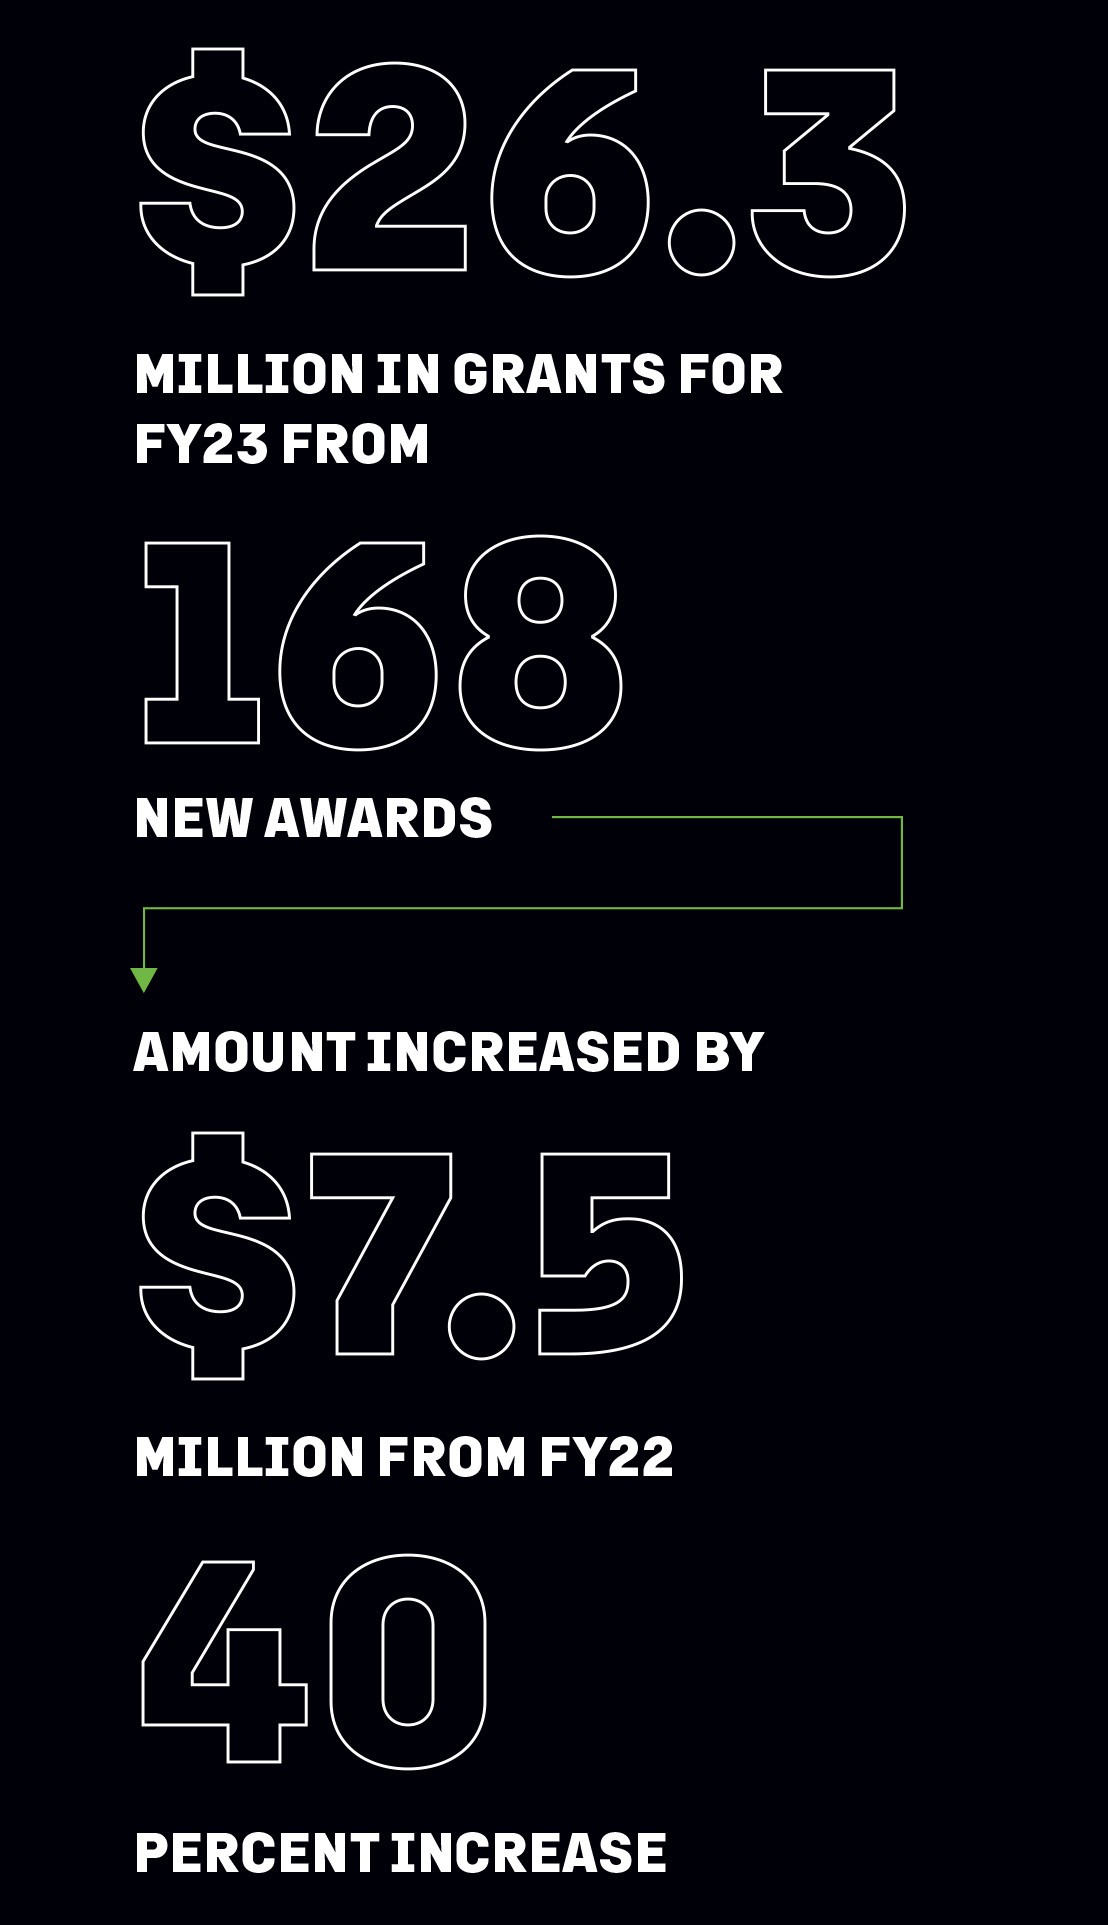 Text depicting the following stats: {"attributes":{}}6.3 million in grants for FY23 from 168 new awards, amount increased by $7.5 million from FY22, 40 percent increase